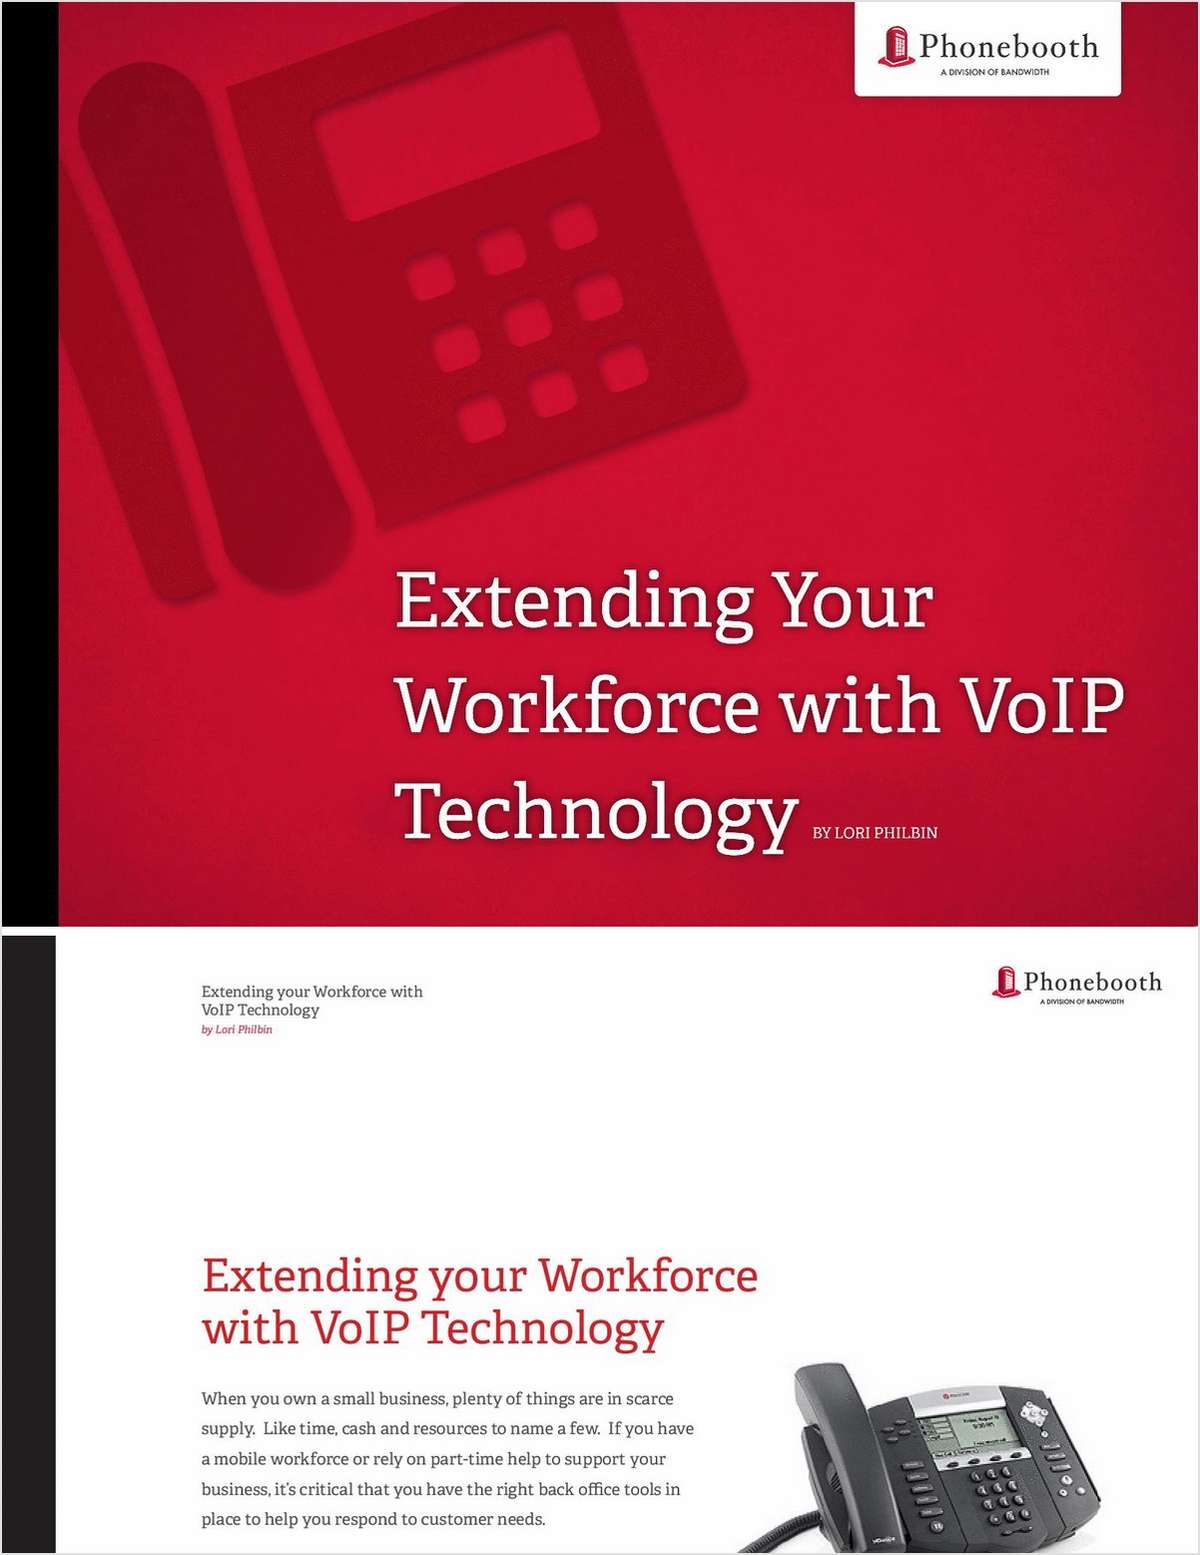 Extending Your Workforce with VoIP Technology